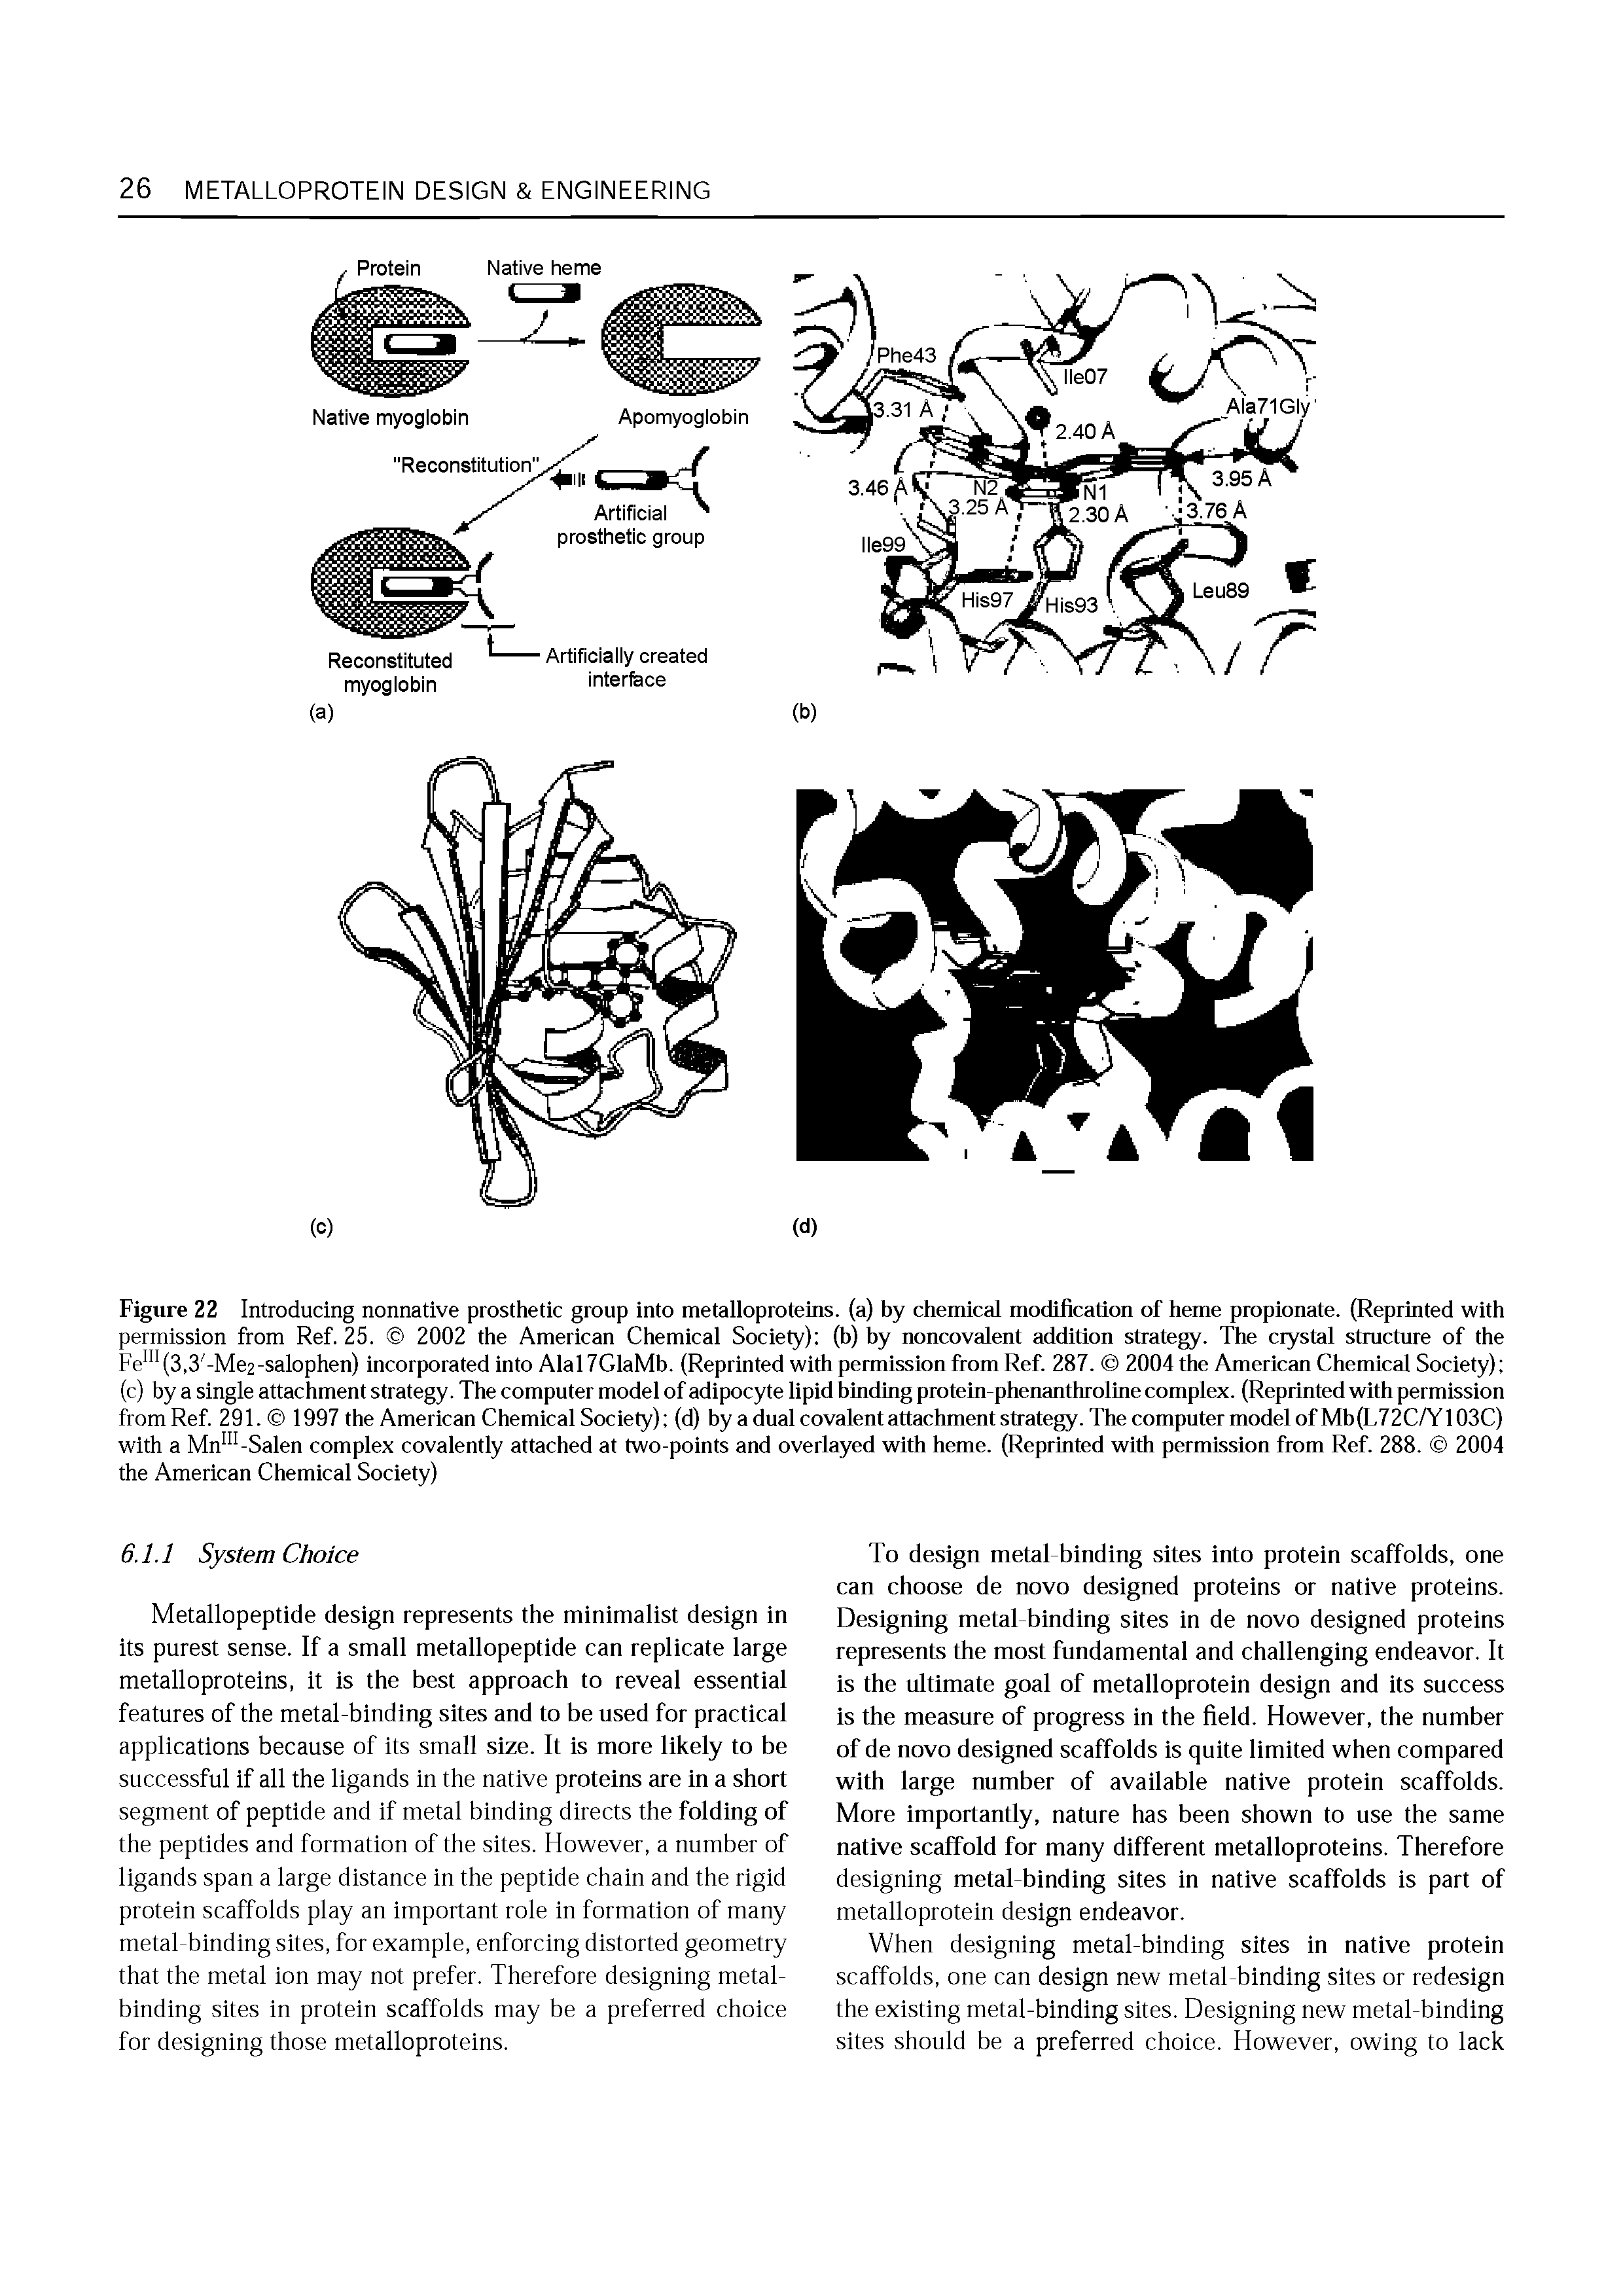 Figure 22 Introducing nonnative prosthetic group into metalloproteins. (a) by chemical modification of heme propionate. (Reprinted with permission from Ref. 25. 2002 the American Chemical Society) (b) by noncovalent addition strategy. The crystal structure of the Fe (3,3 -Me2-salophen) incorporated into Alal7GlaMb. (Reprinted with permission from Ref. 287. 2004 the American Chemical Society) (c) by a single attachment strategy. The computer model of adipocyte lipid binding protein-phenanthrolme complex. (Reprinted with permission from Ref. 291. 1997 the American Chemical Society) (d) by a dual covalent attachment strategy. The computer model of Mb(L72CA 103C) with a Mn -Salen complex covalently attached at two-points and overlayed with heme. (Reprinted with permission from Ref. 288. 2004 the American Chemical Society)...